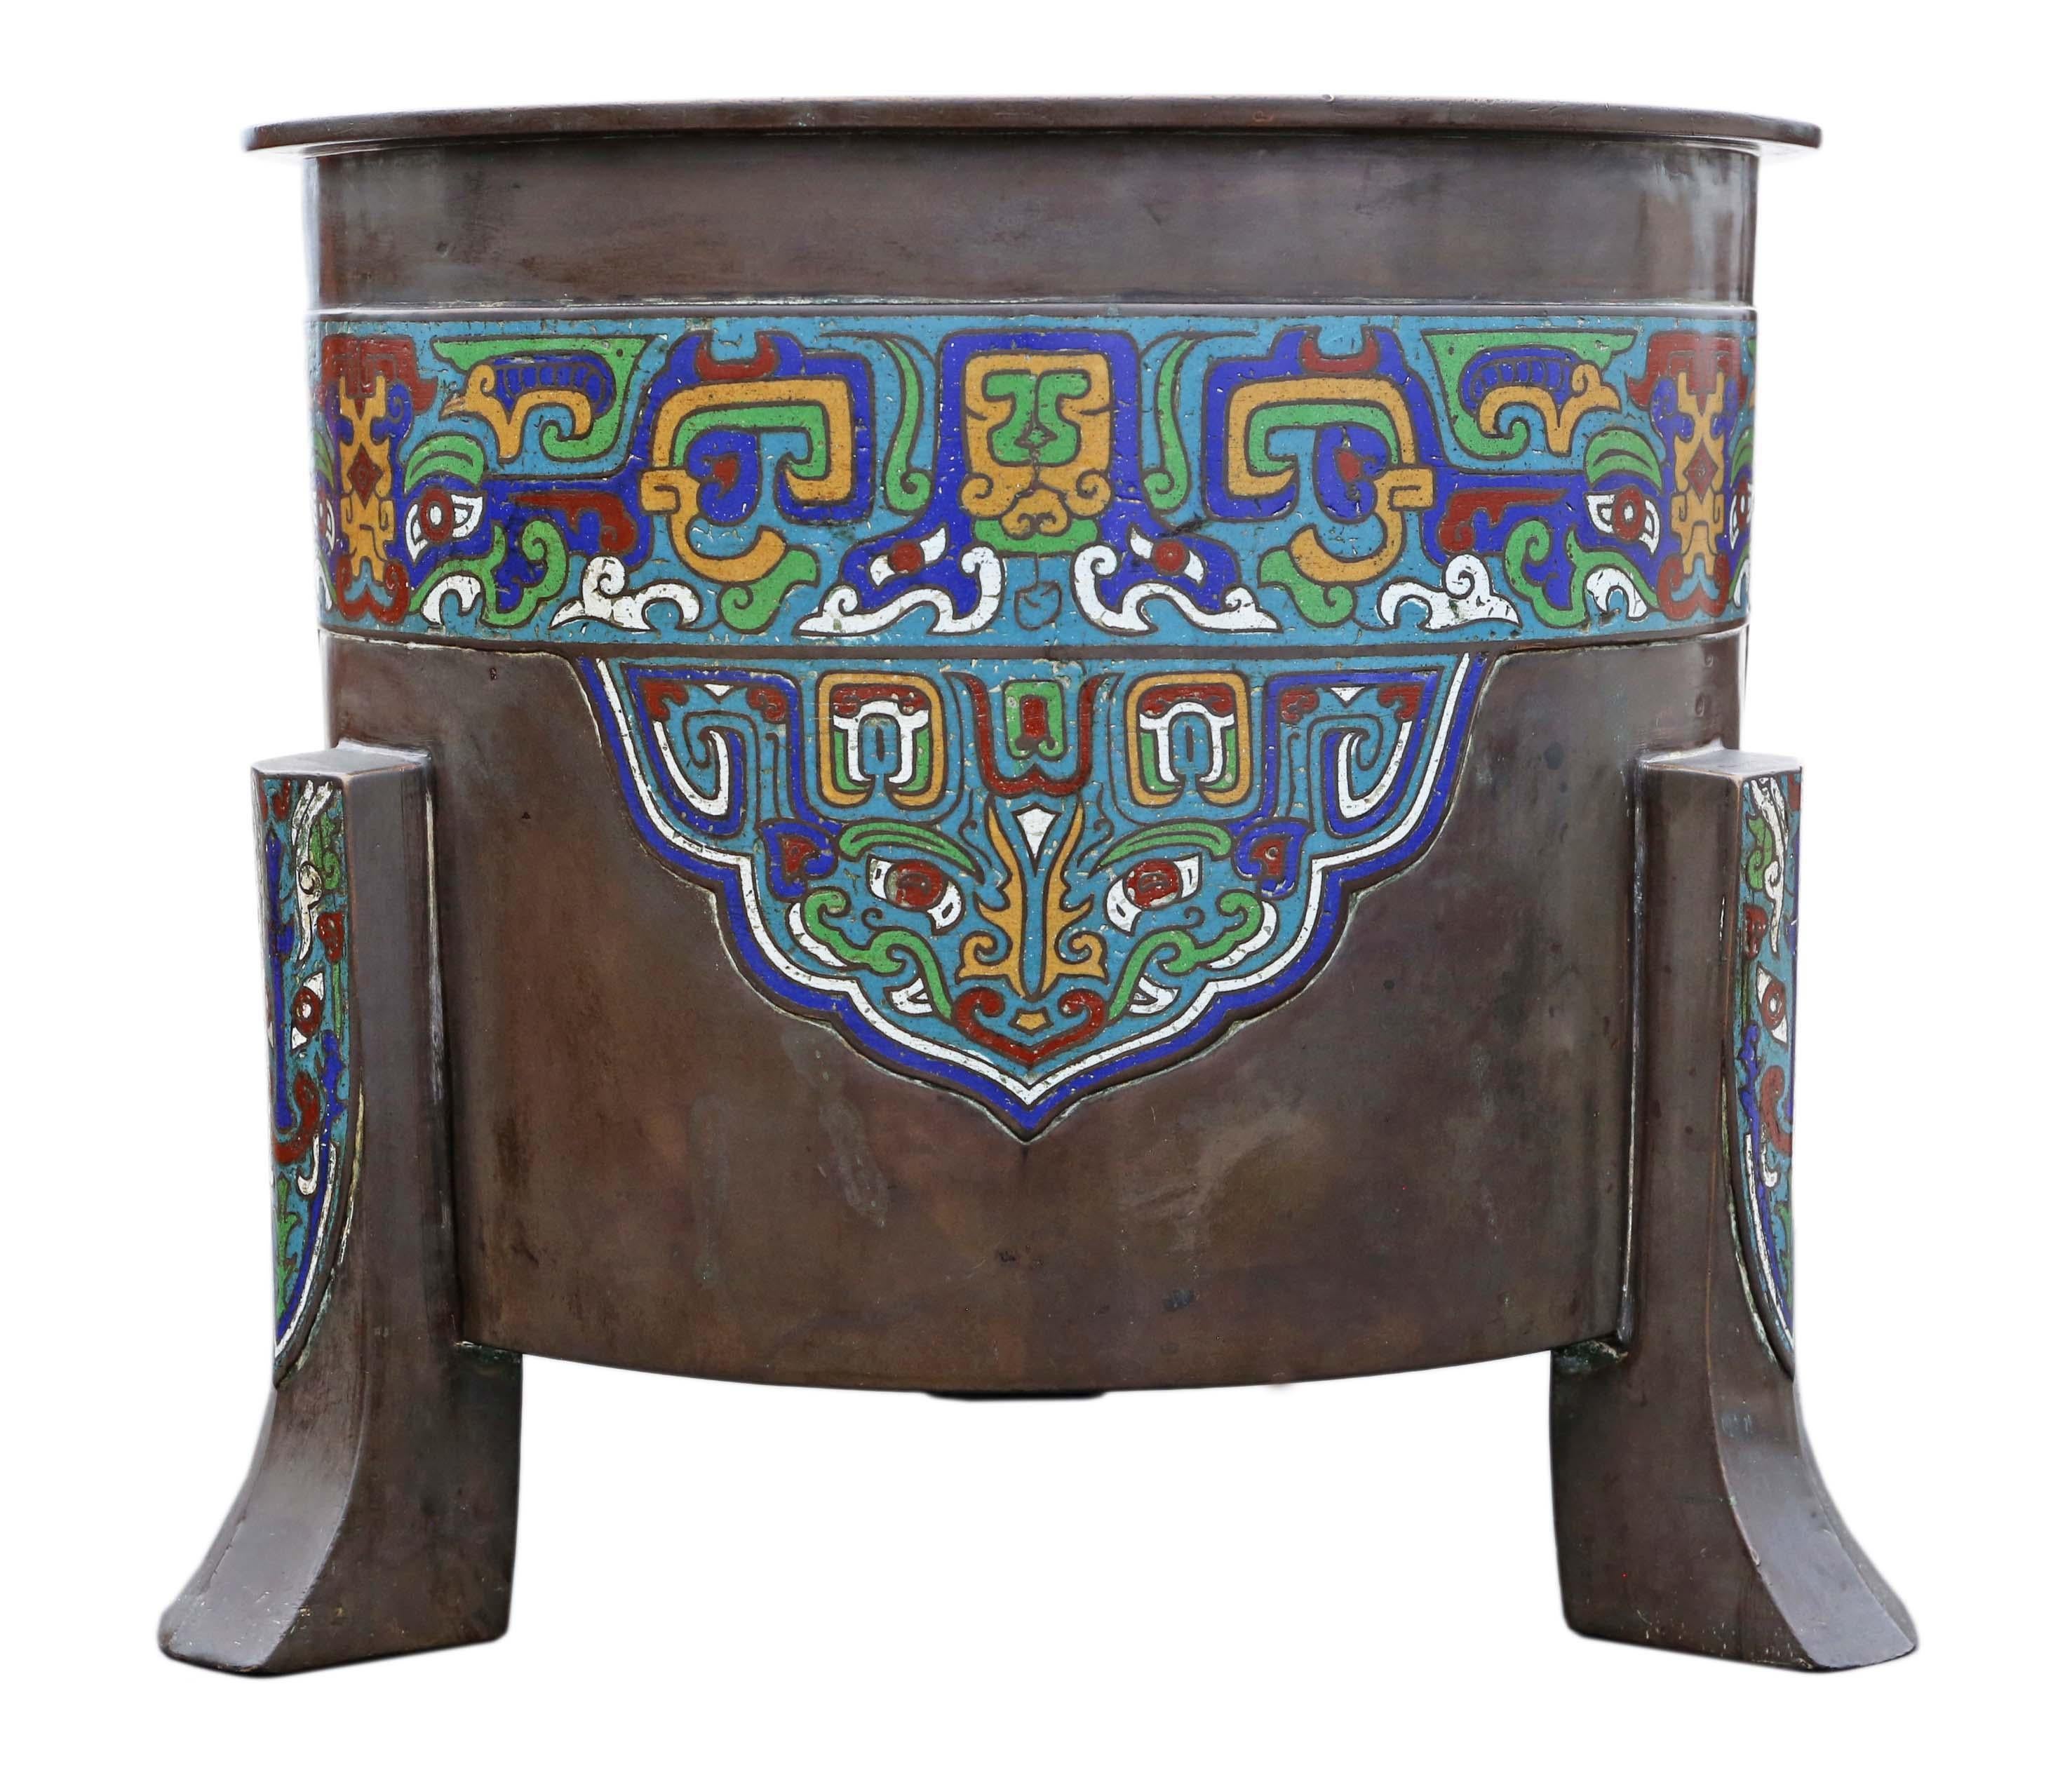 Antique large quality Oriental Japanese chinese bronze champleve enamel Jardiniere planter bowl C1920.

Would look amazing in the right location. Rare large size and design.

Overall maximum dimensions: 33cm diameter (40cm including feet) x 30cm